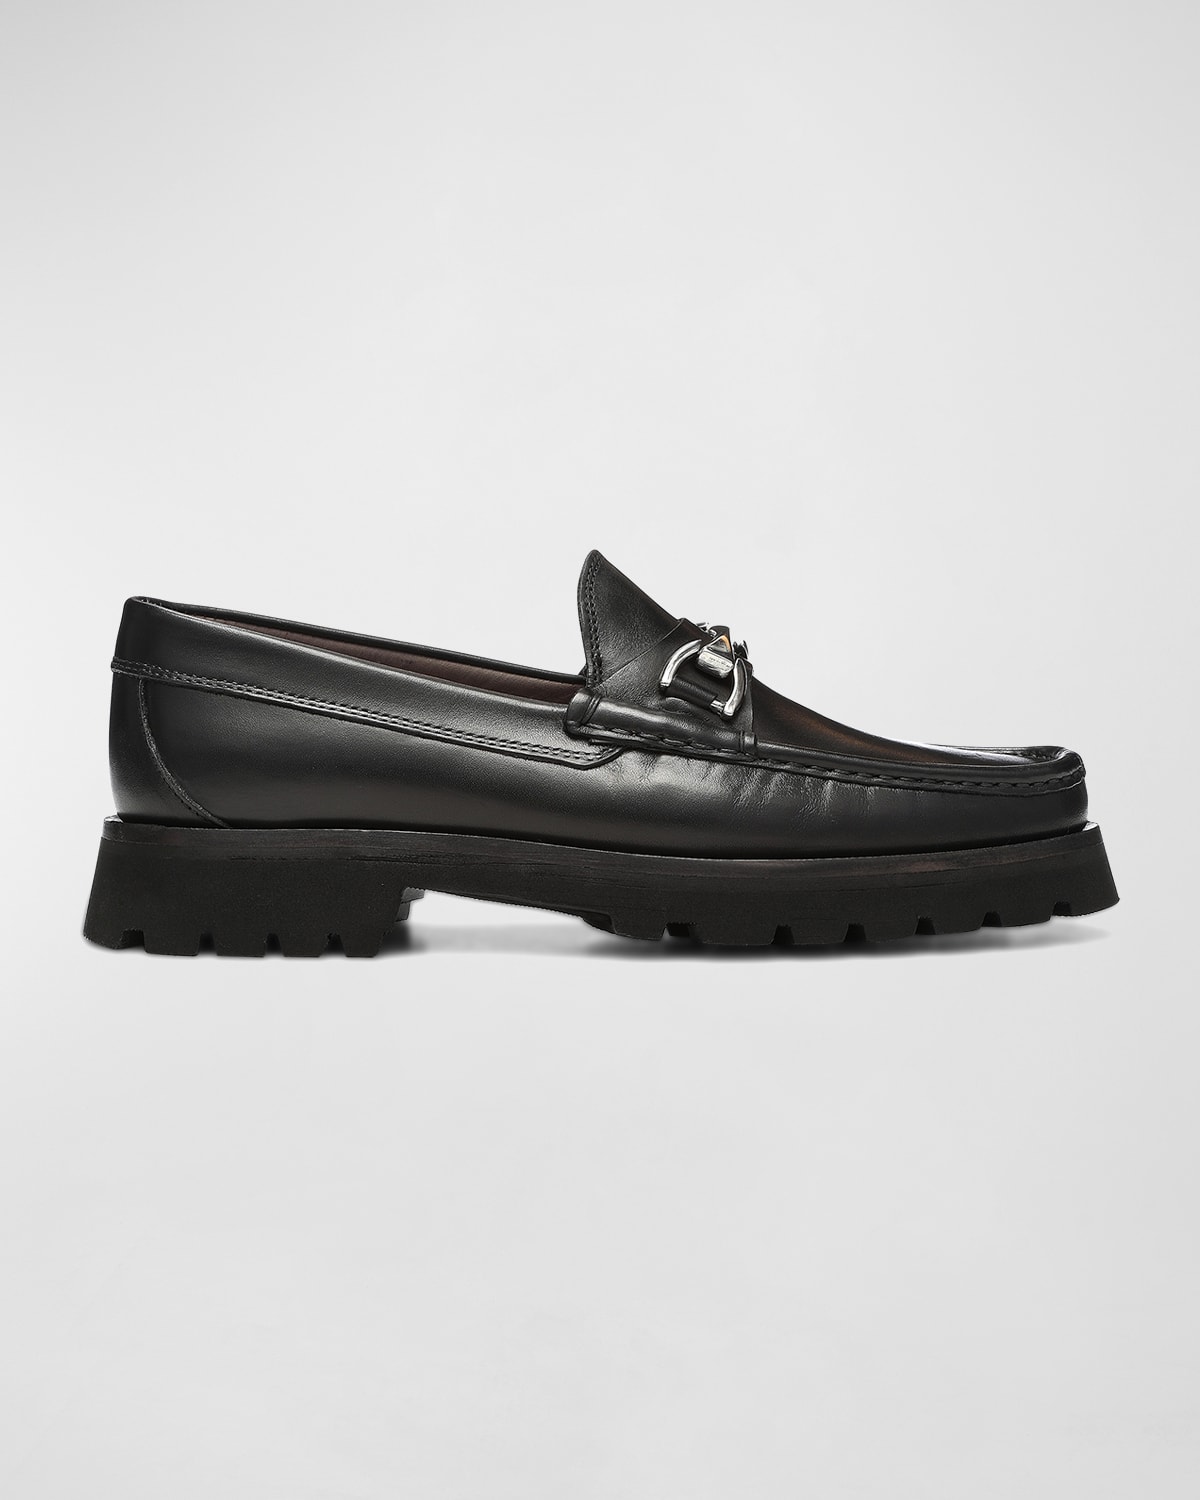 Donald Pliner Men's Davey Leather Lug-Sole Loafers with Bit-Strap